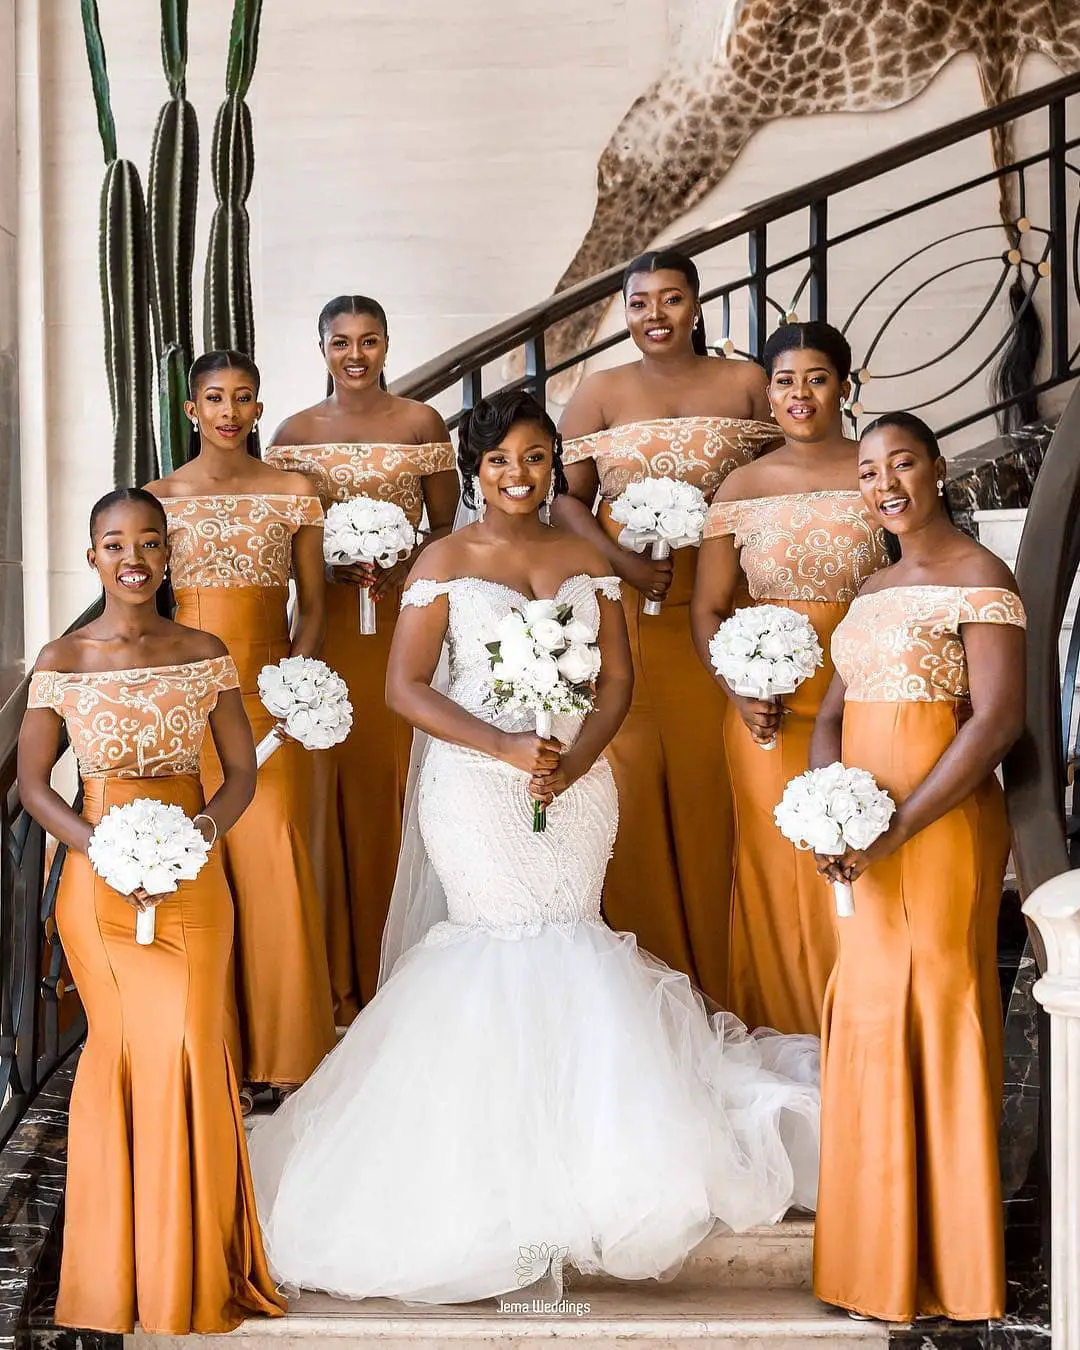 These Bridesmaids Styles Have Flair